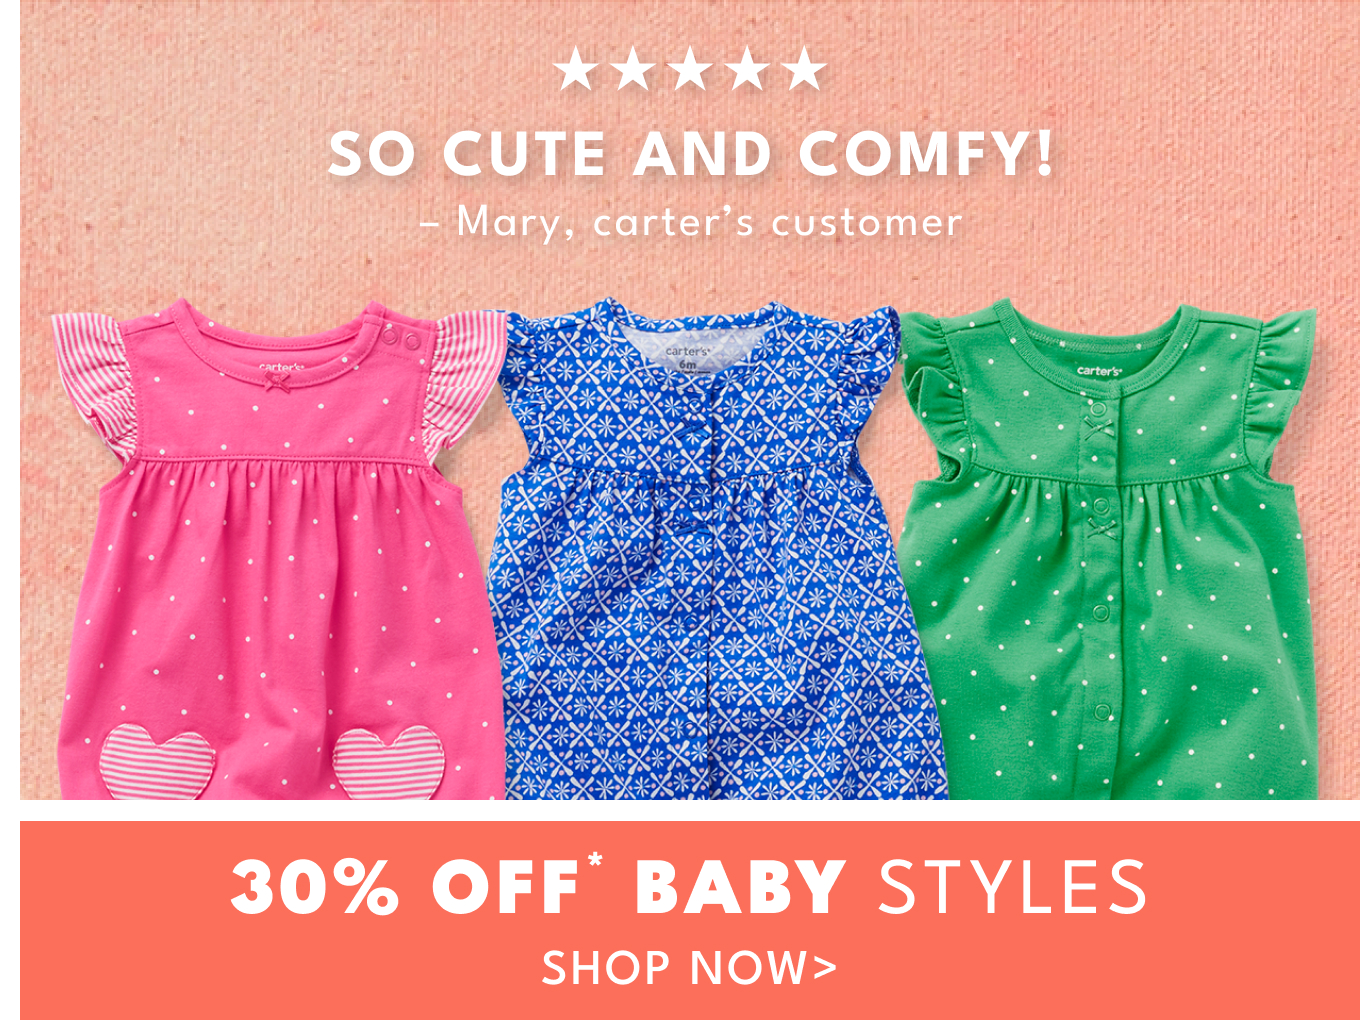 SO CUTE AND COMFY! | - Mary, carter's customer | 30% OFF* BABY STYLES | SHOP NOW